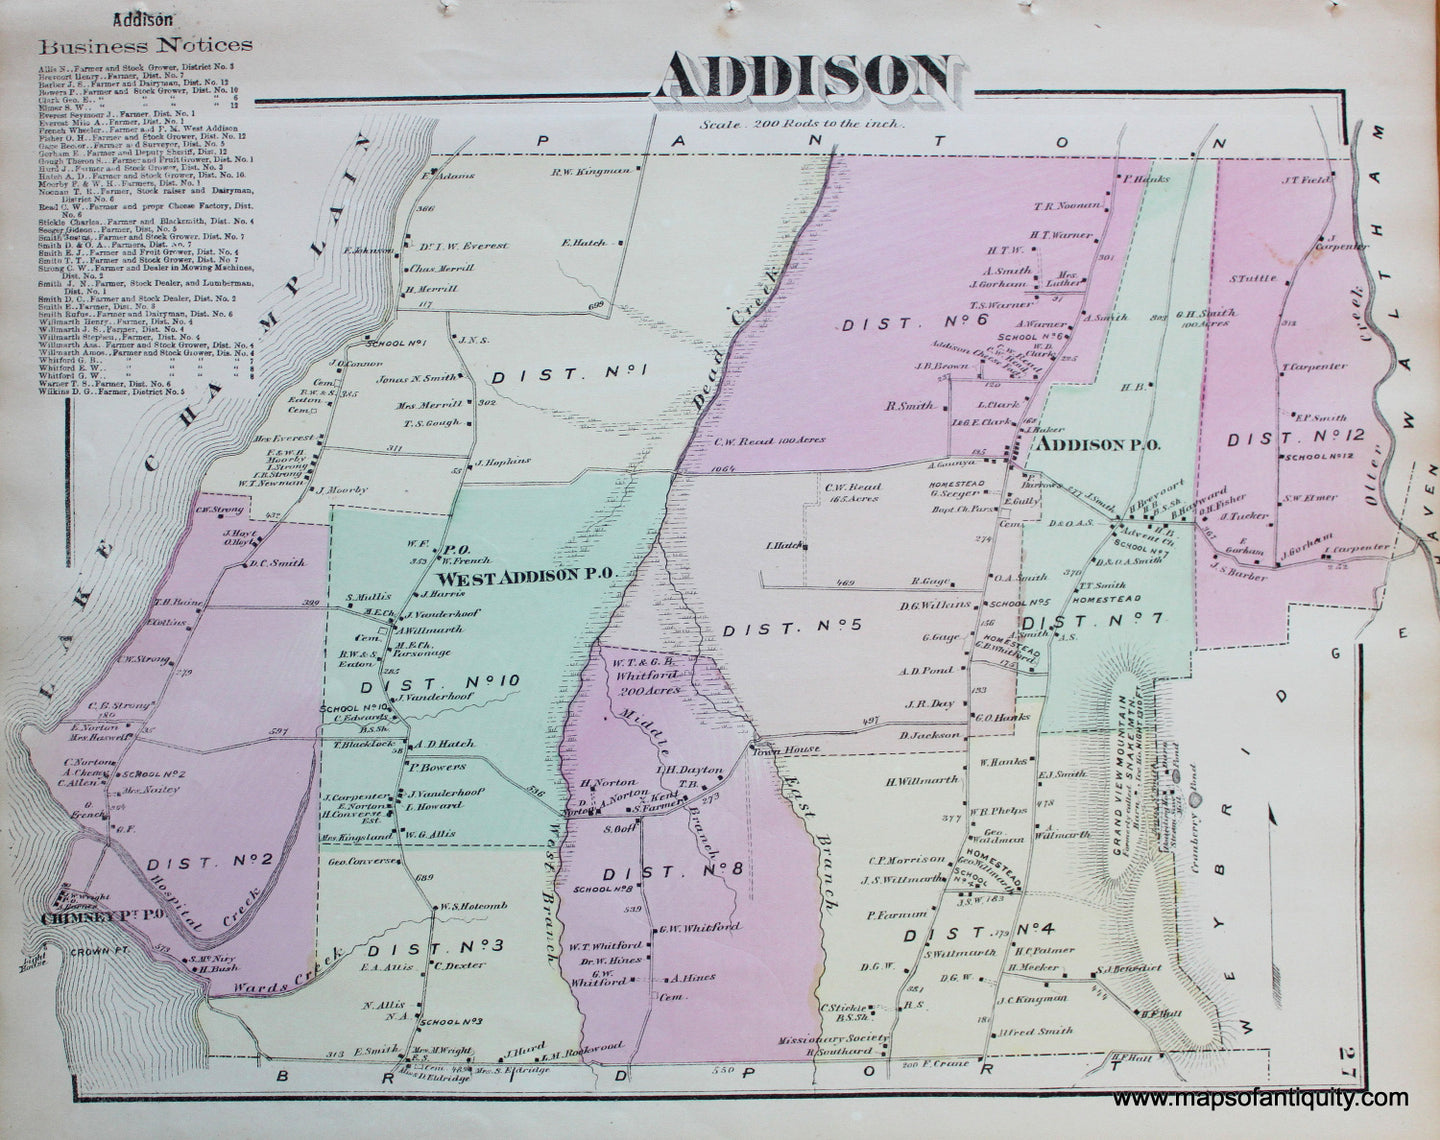 Antique-Hand-Colored-Map-Addison-VT---Vermont-United-States-Northeast-1871-Beers-Maps-Of-Antiquity